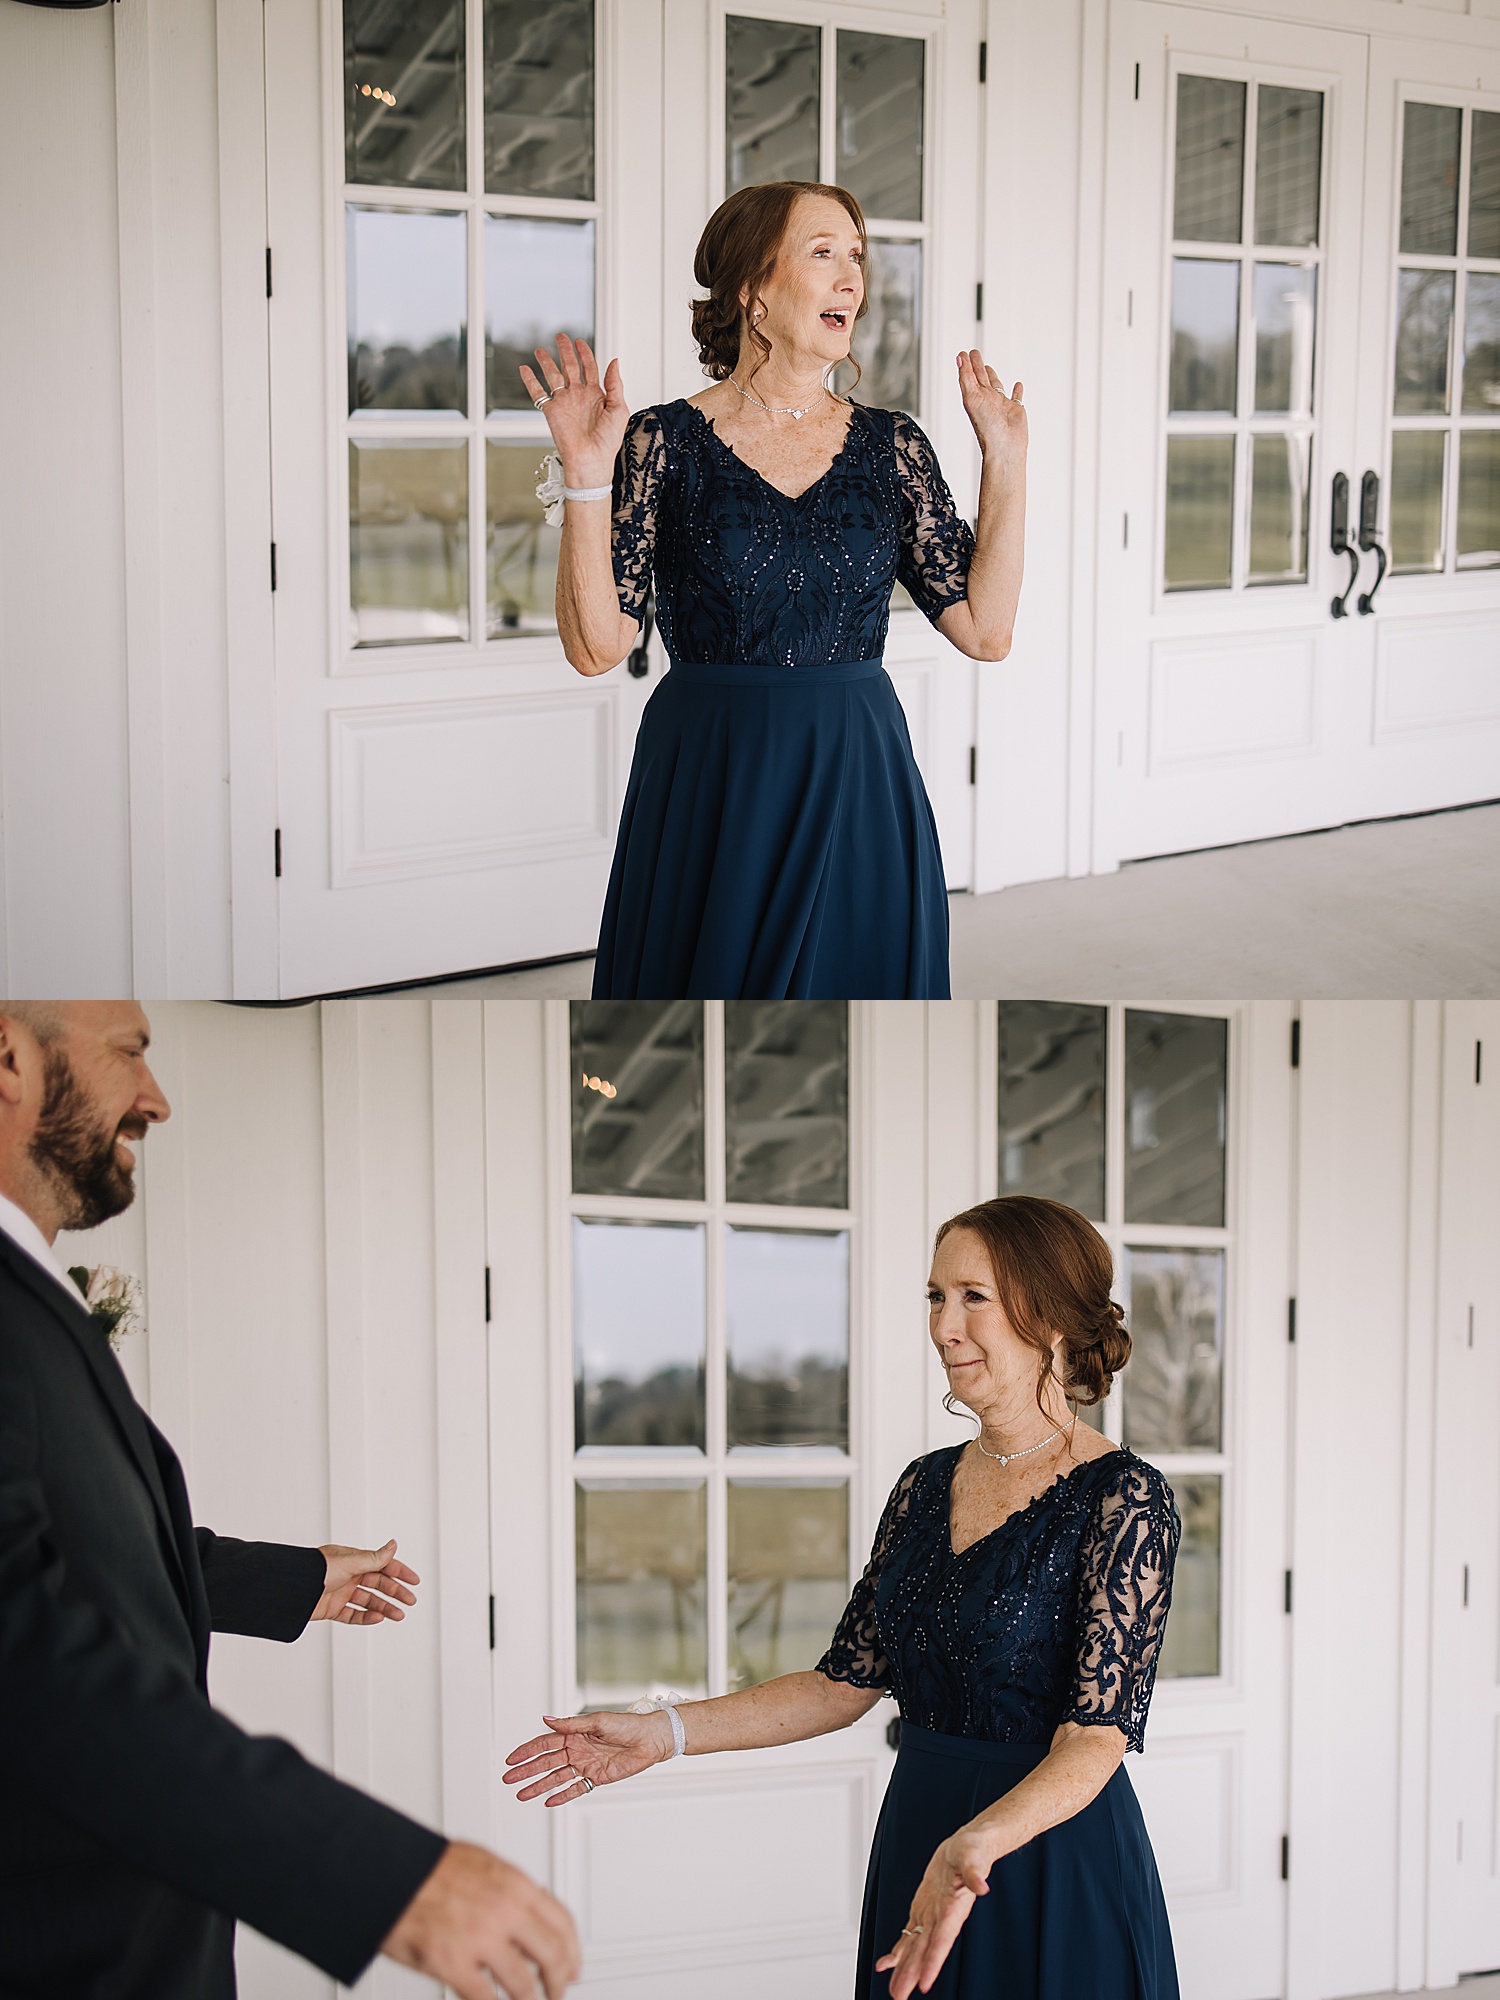 Mother of the groom sees him for the first time outside of wedding venue 